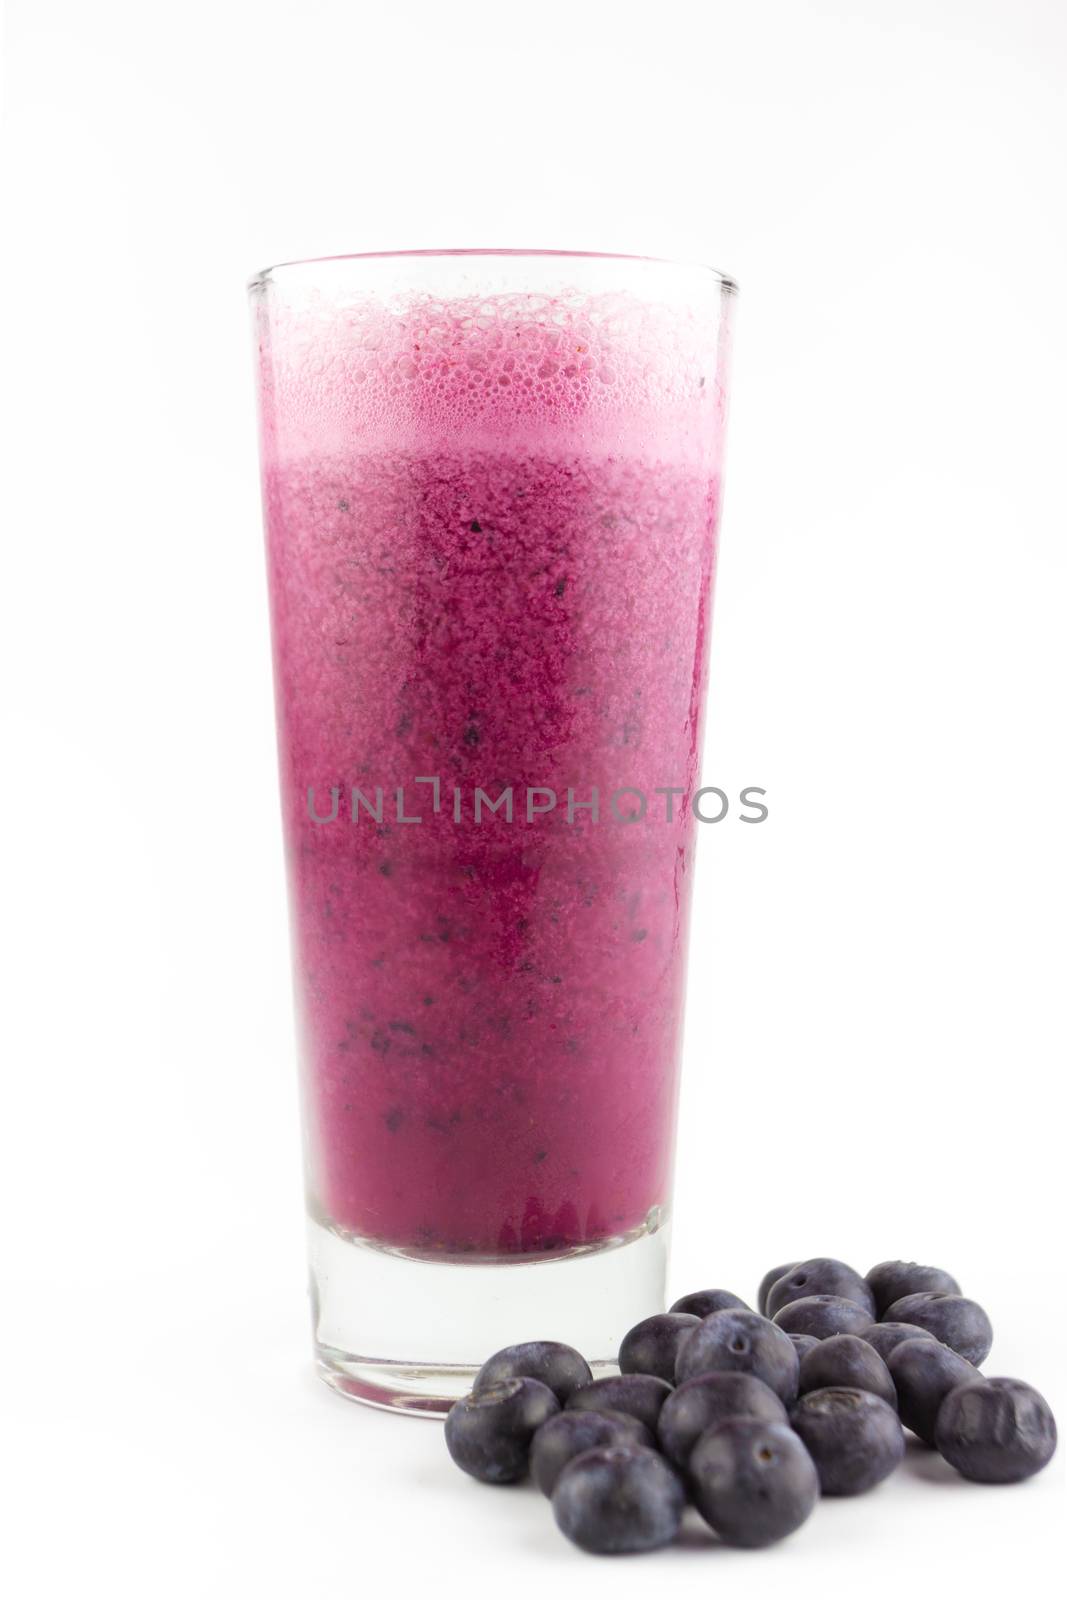 Blueberry smoothie with fresh blueberry on white background  by wyoosumran